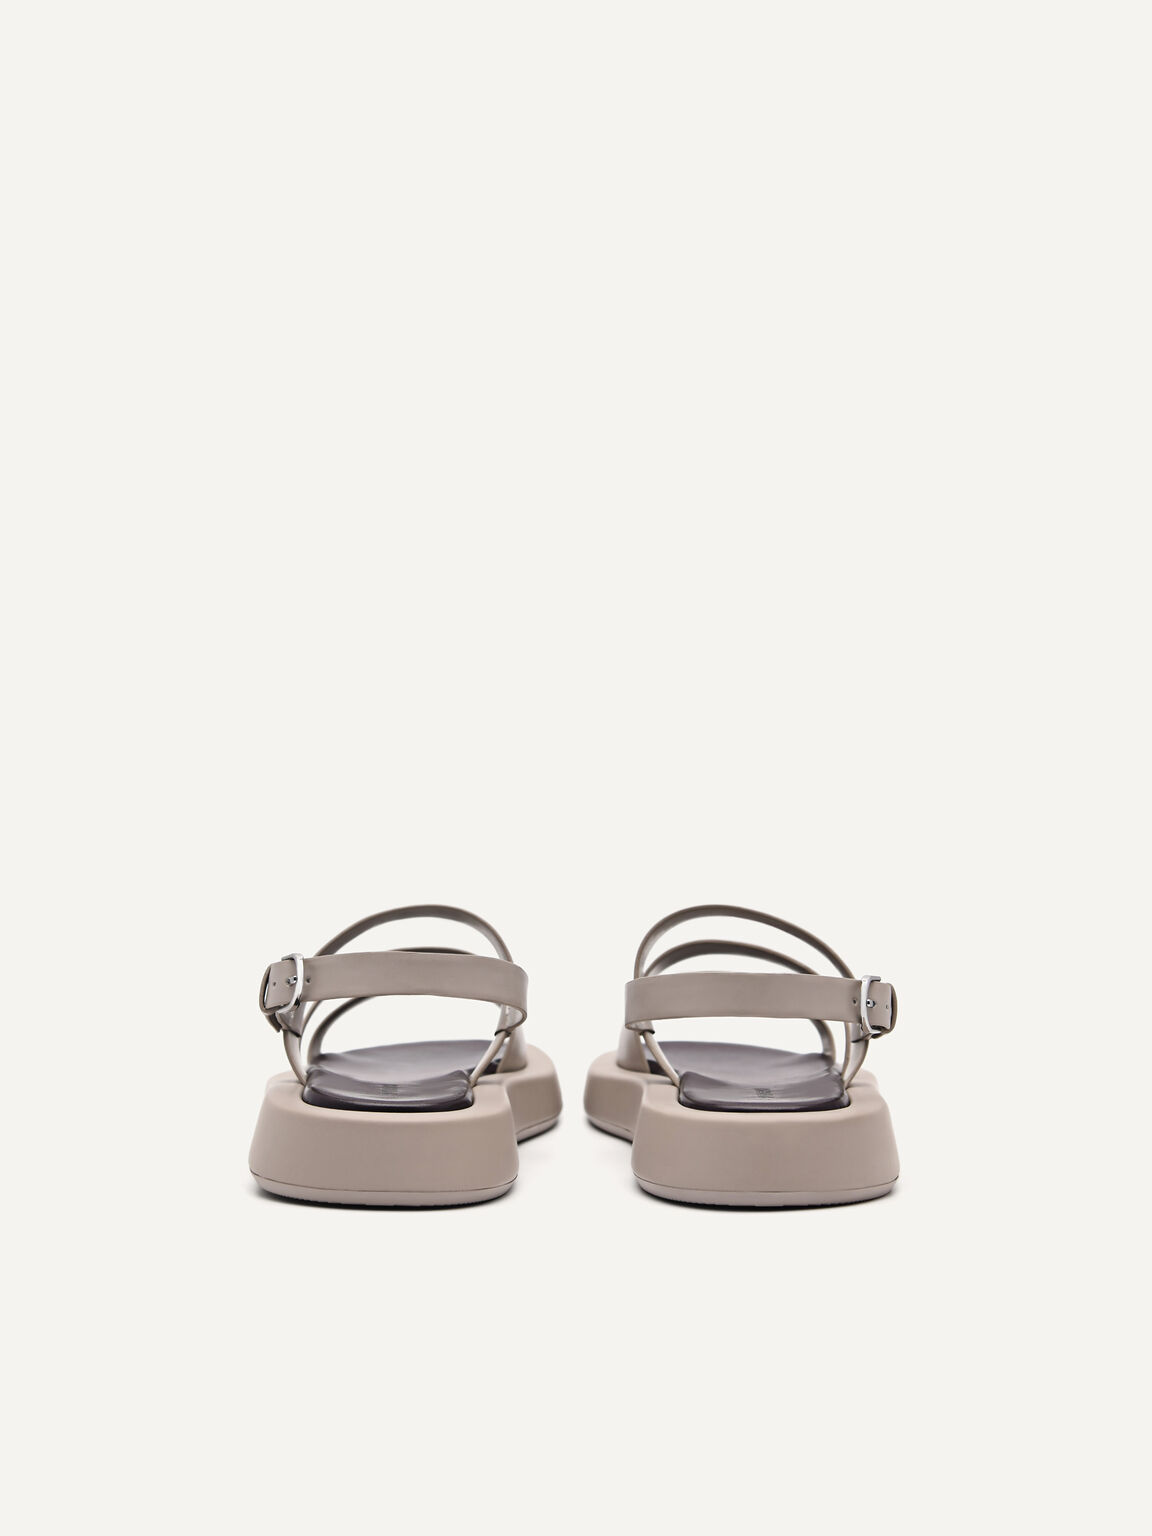 Cube Strappy Sandals, Taupe, hi-res